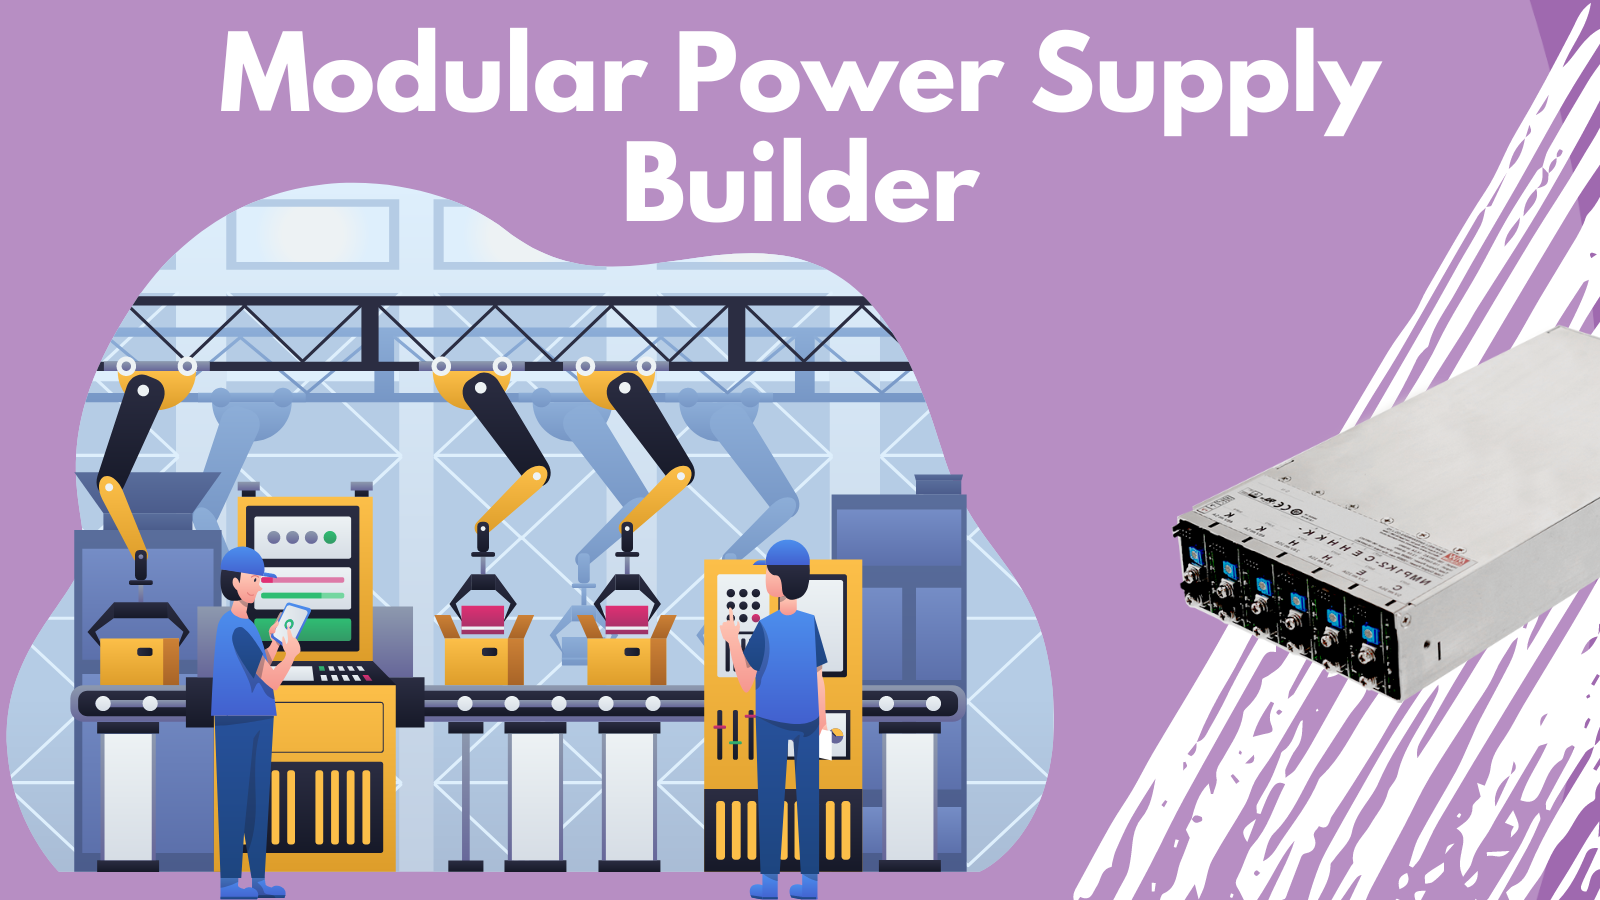 Tell us your requirements and we can build your modular power supply for you